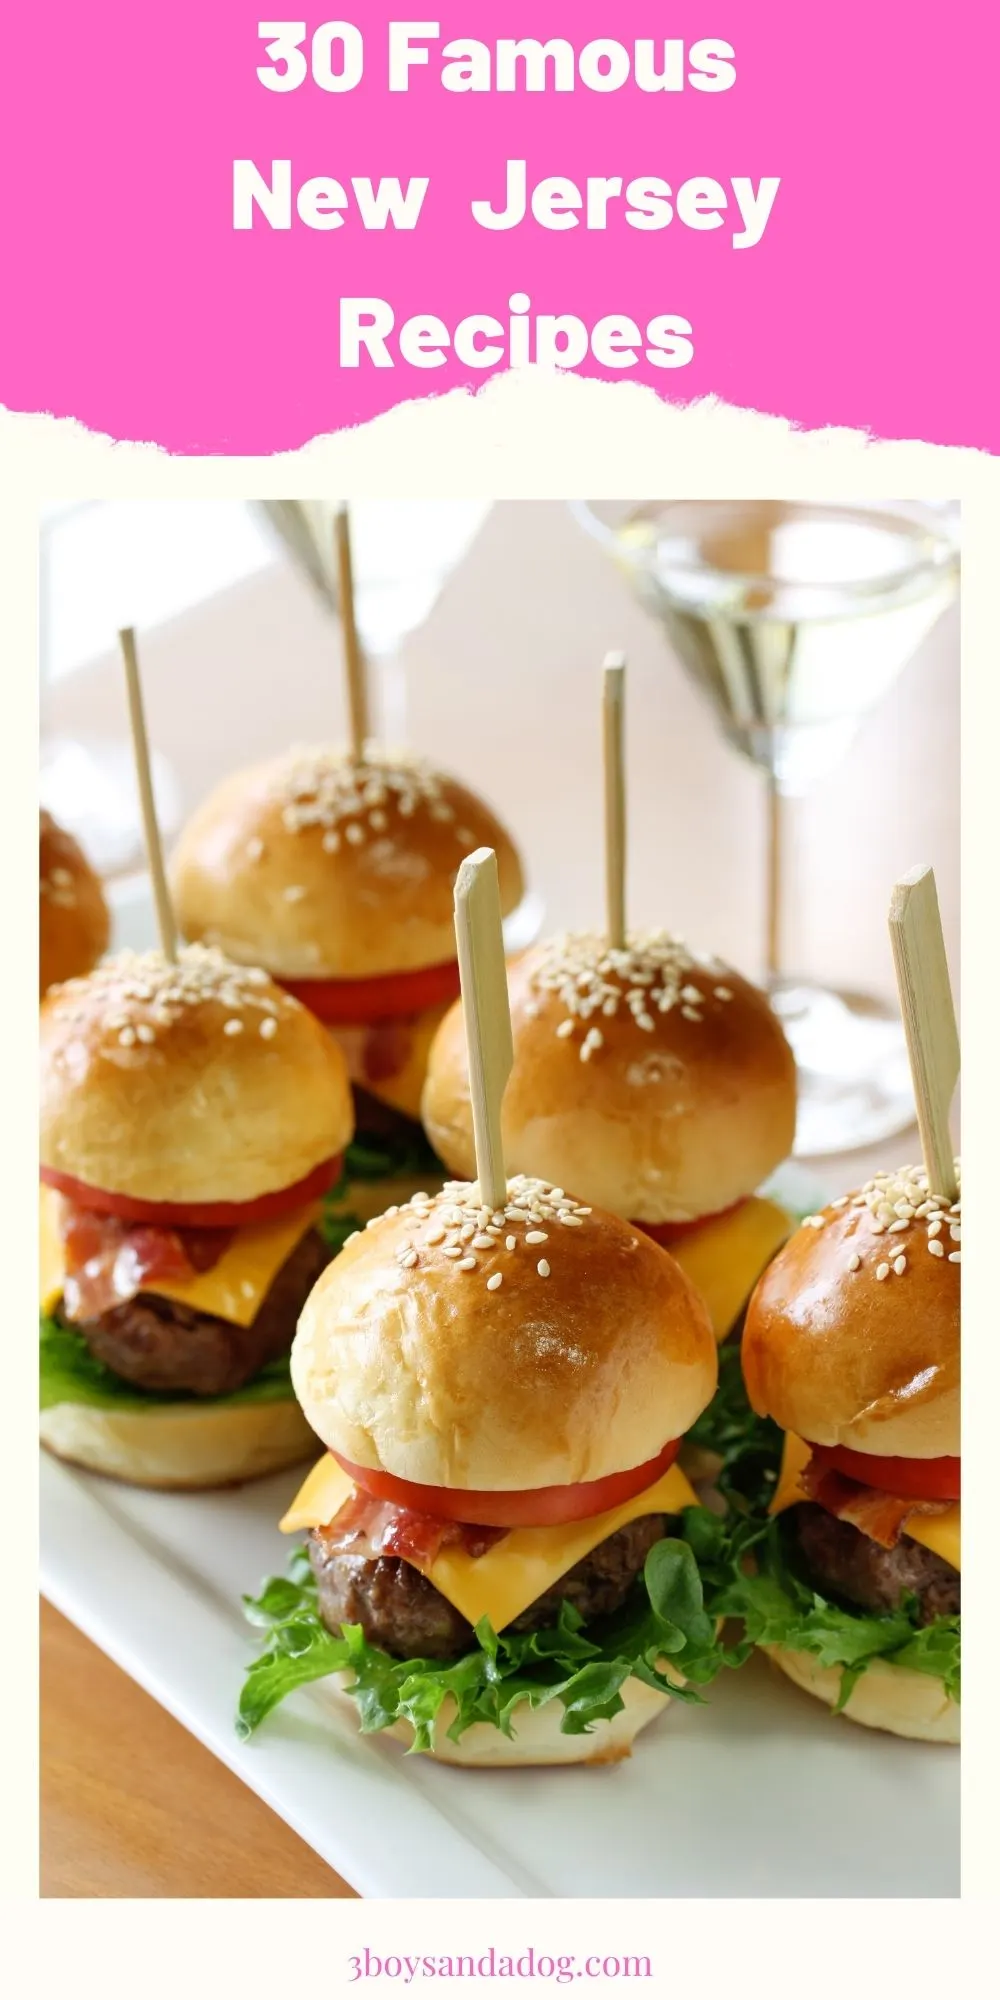 extra pin with slider burgers on a white plate for famous New Jersey recipes